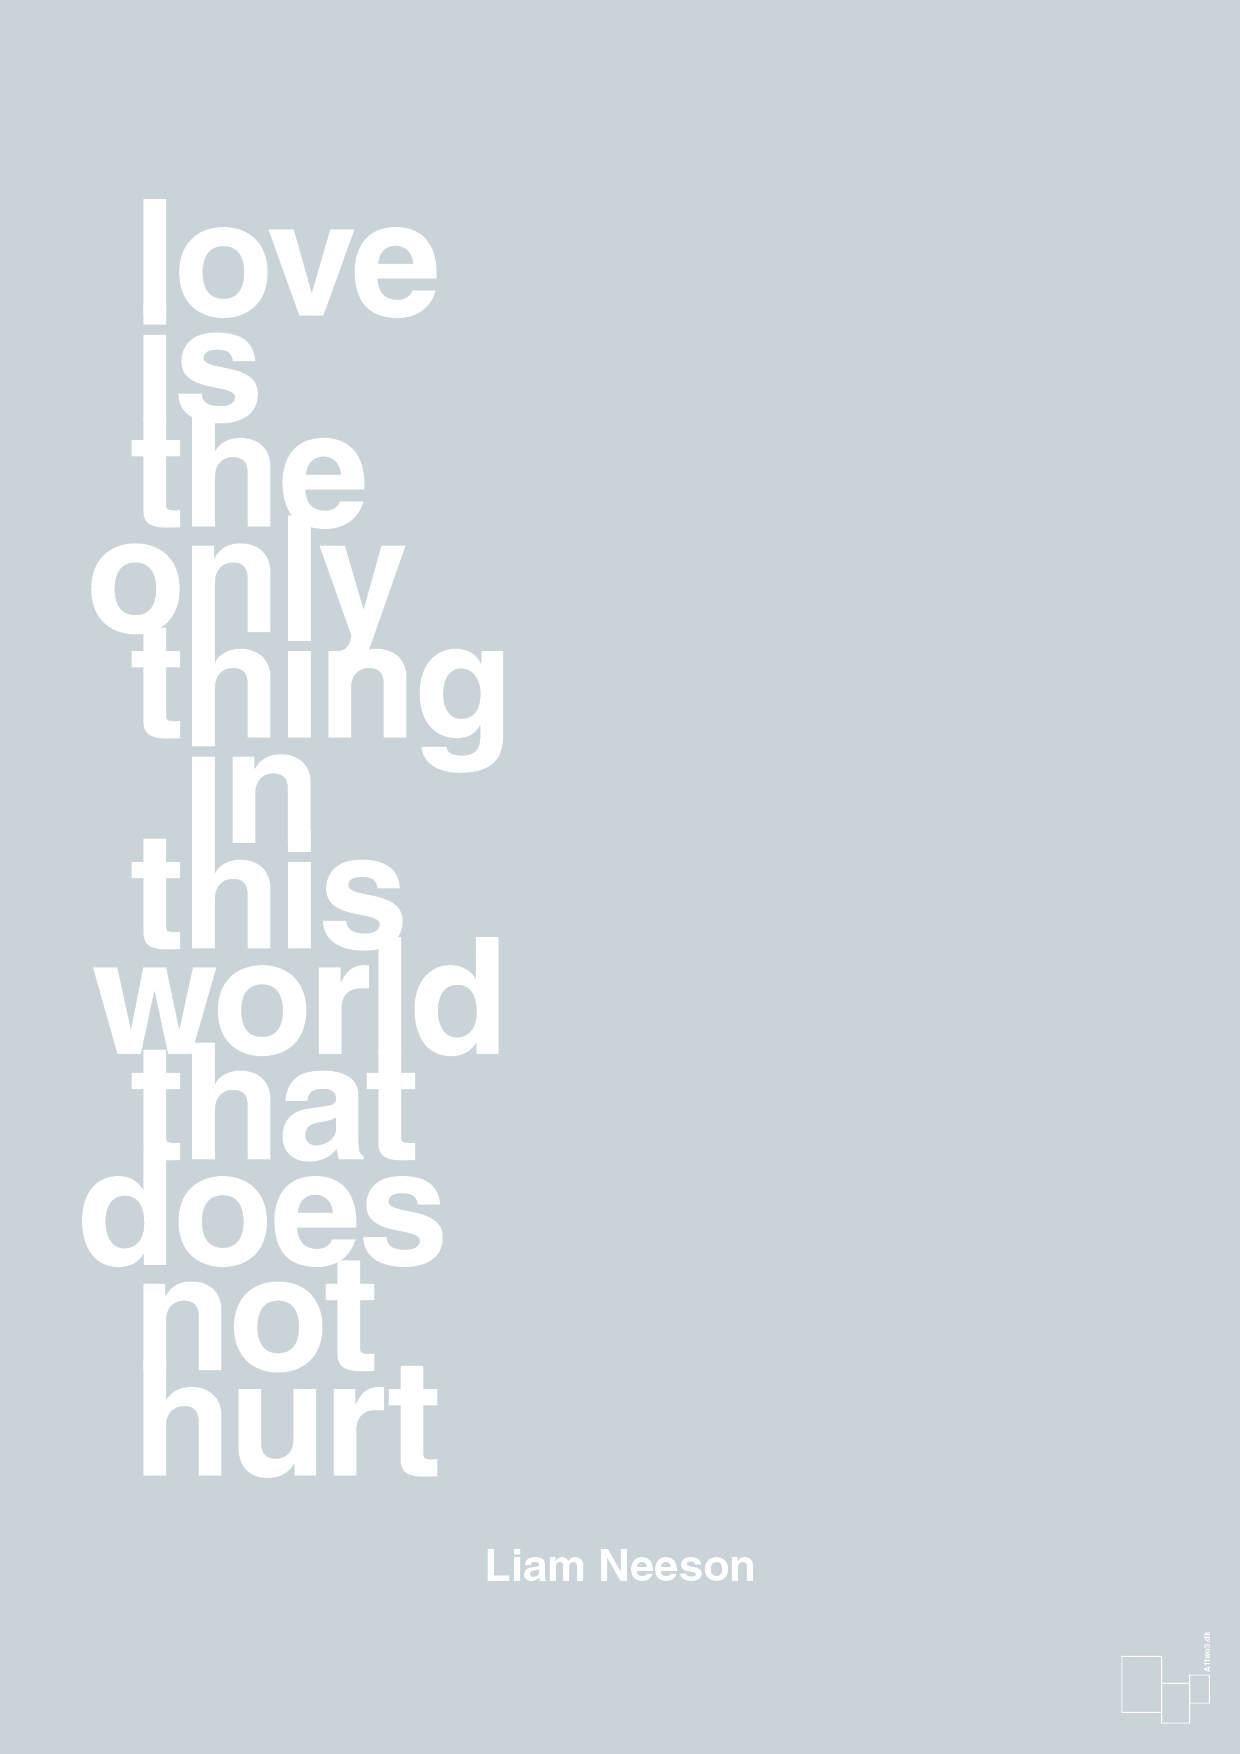 love is the only thing in this world that does not hurt - Plakat med Citater i Light Drizzle